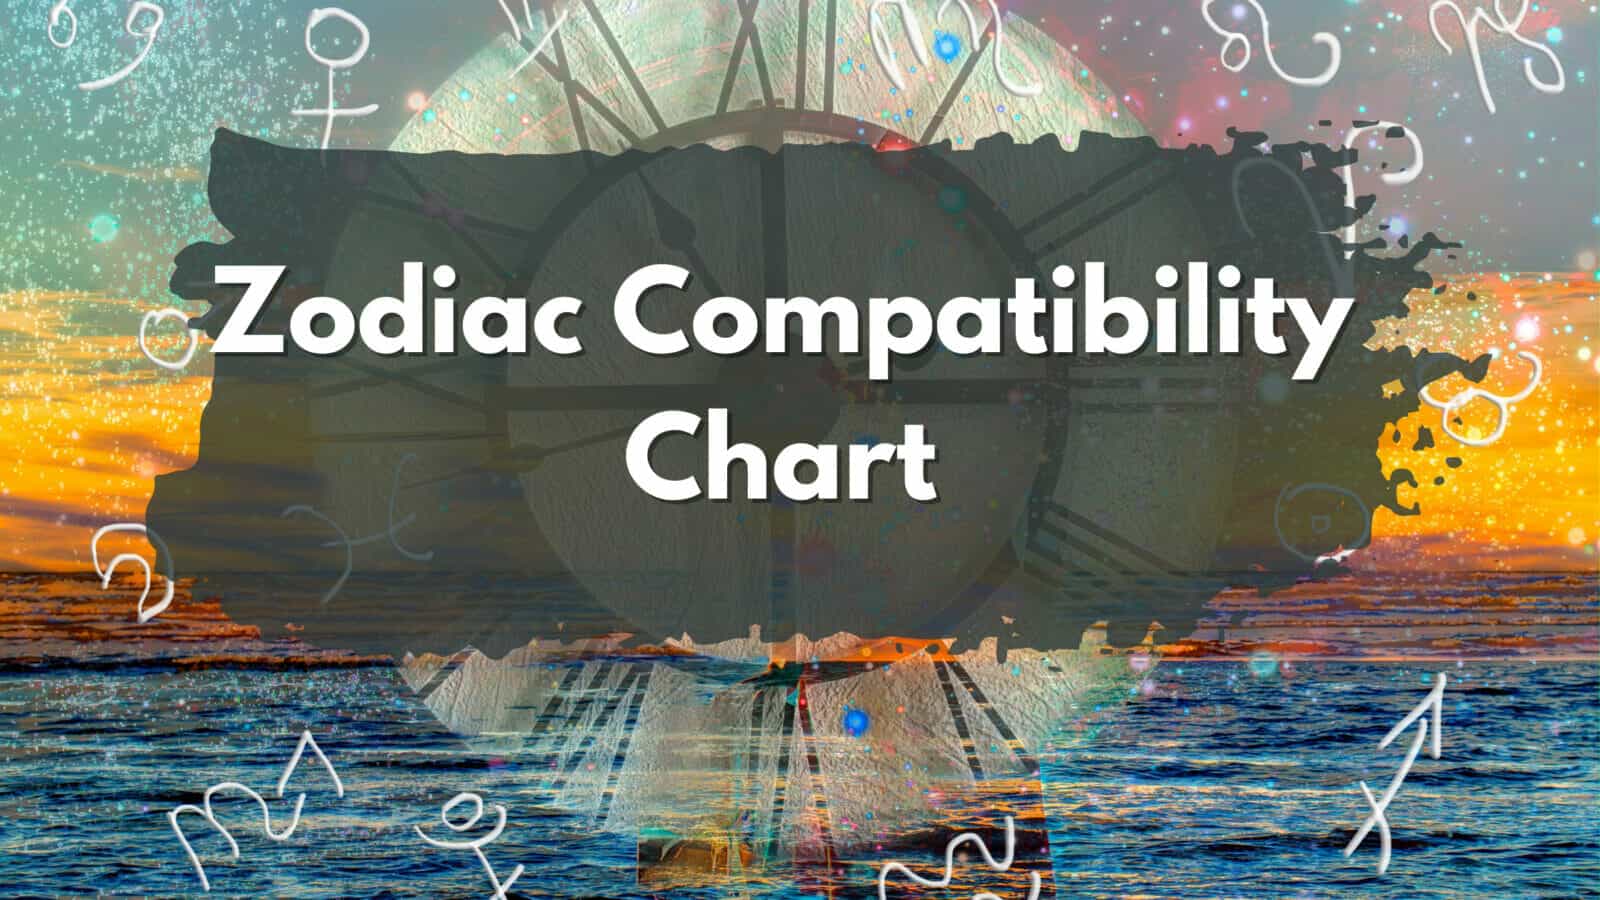 Chart displaying compatibility between zodiac signs.